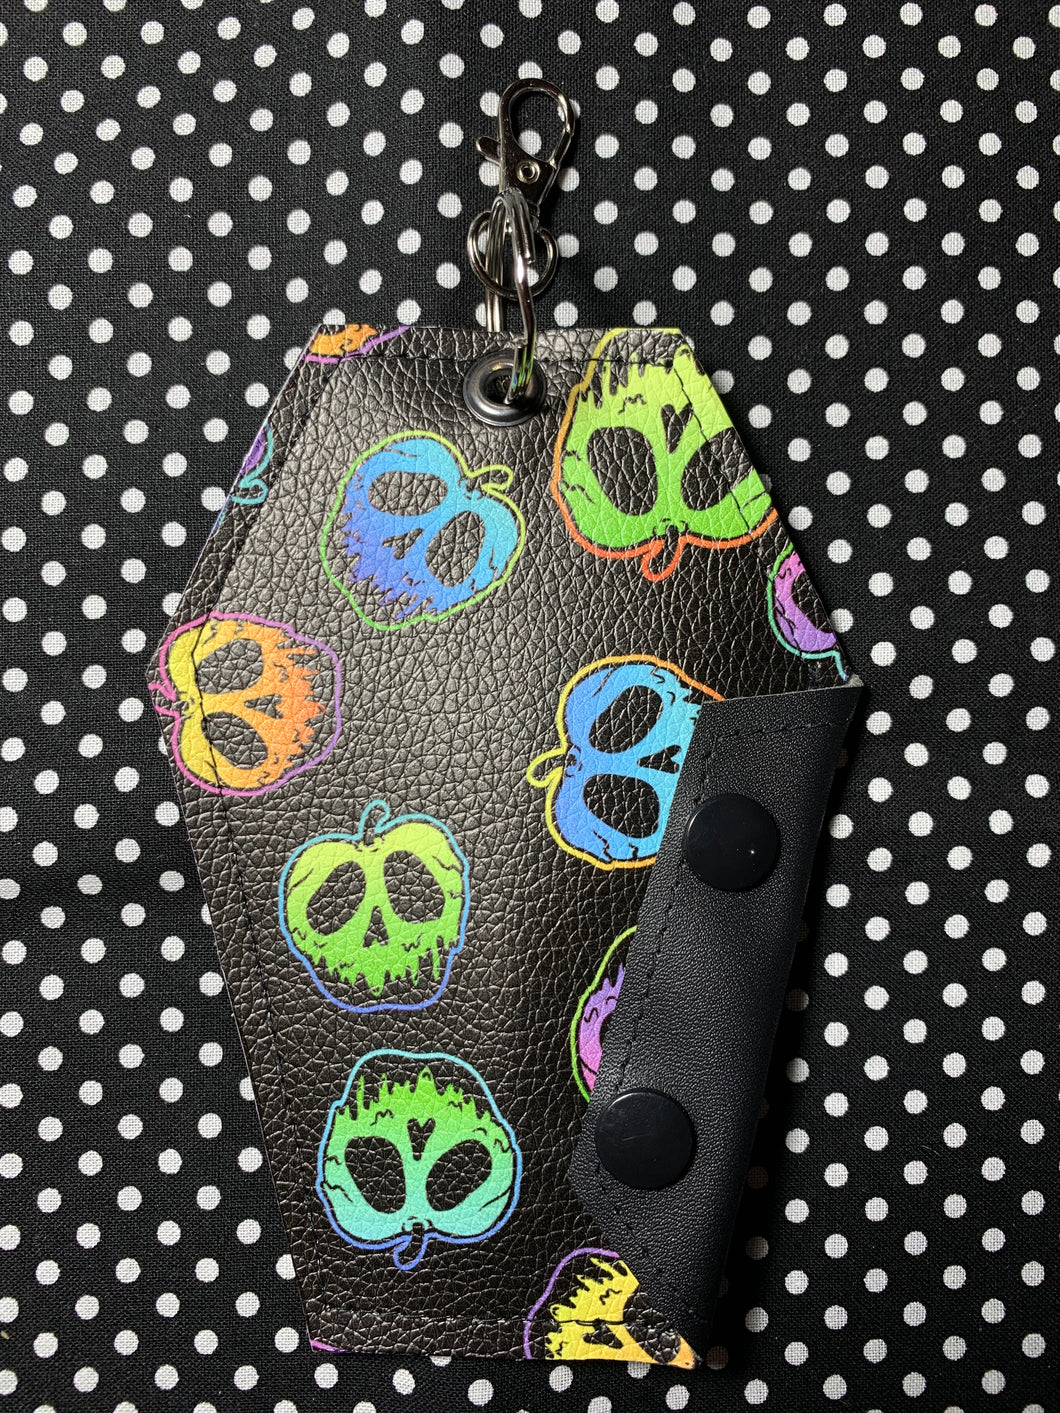 Colourful poisoned apples with black side fan art mini coffin purse